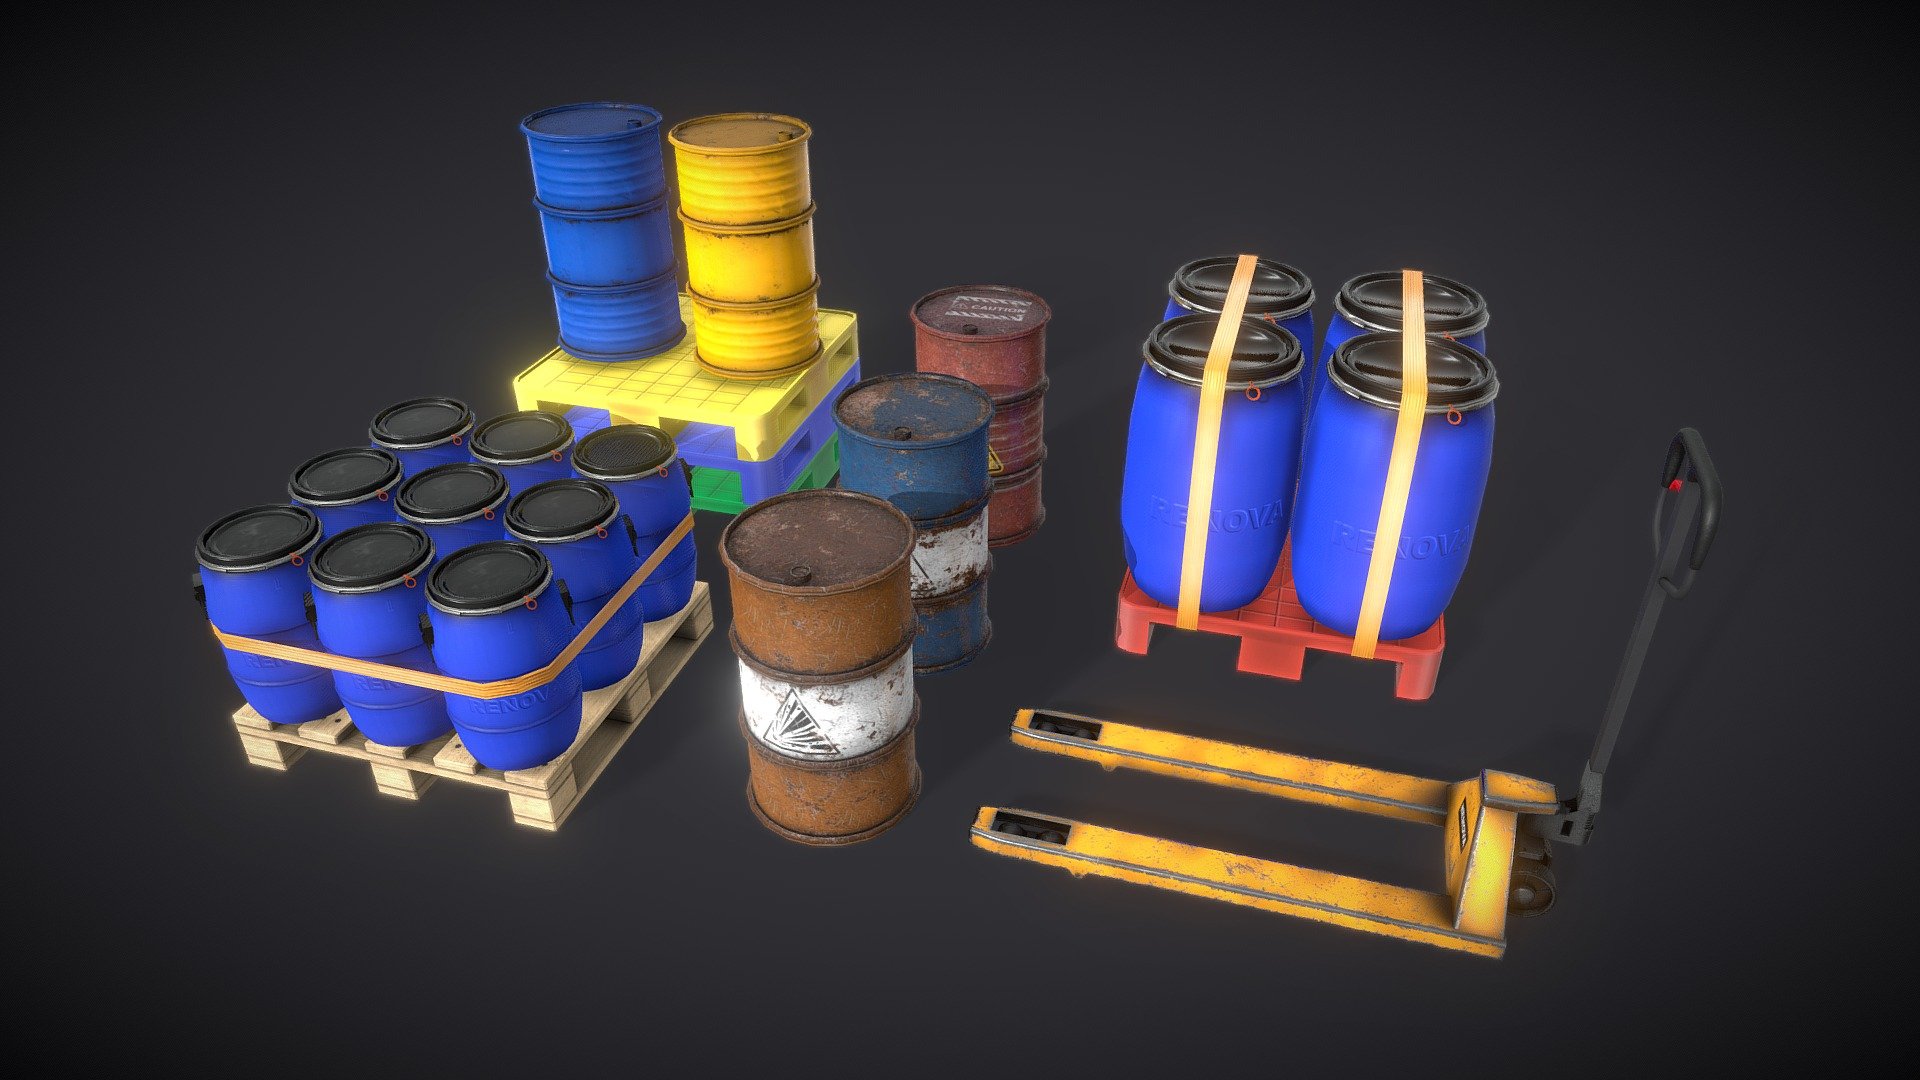 Containers and Pallets Pack



Texture : PBR, 1024

Files Include : Textures, GLB &amp; FBX

Usage : VR, Game ready

.............

OVA’s flagship software, StellarX, allows those with no programming or coding knowledge to place 3D goods and create immersive experiences through simple drag-and-drop actions. 

Storytelling, which involves a series of interactions, sequences, and triggers are easily created through OVA’s patent-pending visual scripting tool. 

.............

**Download StellarX on the Meta Quest Store: oculus.com/experiences/quest/8132958546745663
**

**Download StellarX on Steam: store.steampowered.com/app/1214640/StellarX
**

Have a bigger immersive project in mind? Get in touch with us! 



StellarX on LinkedIn: linkedin.com/showcase/stellarx-by-ova

Join the StellarX Discord server! 

........

StellarX© 2022 - Fuel Containers And Pallets Pack - Buy Royalty Free 3D model by StellarX 3d model